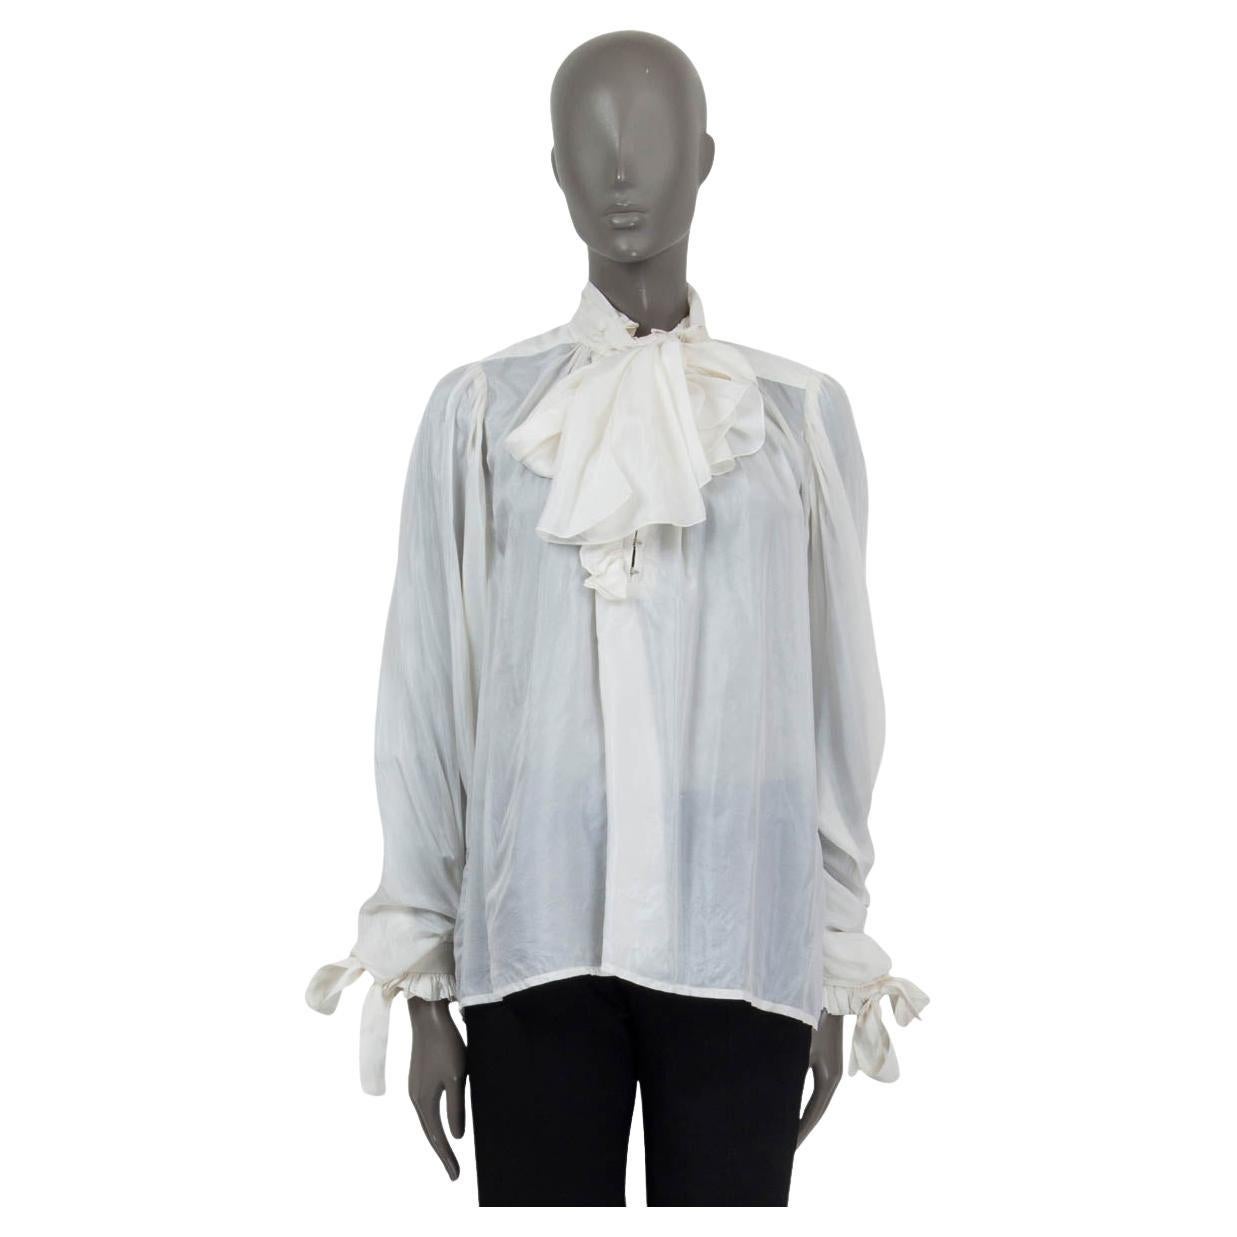 Louis Vuitton White Blouse with Black Trim Ruffled Collar — The Posh Pop-Up